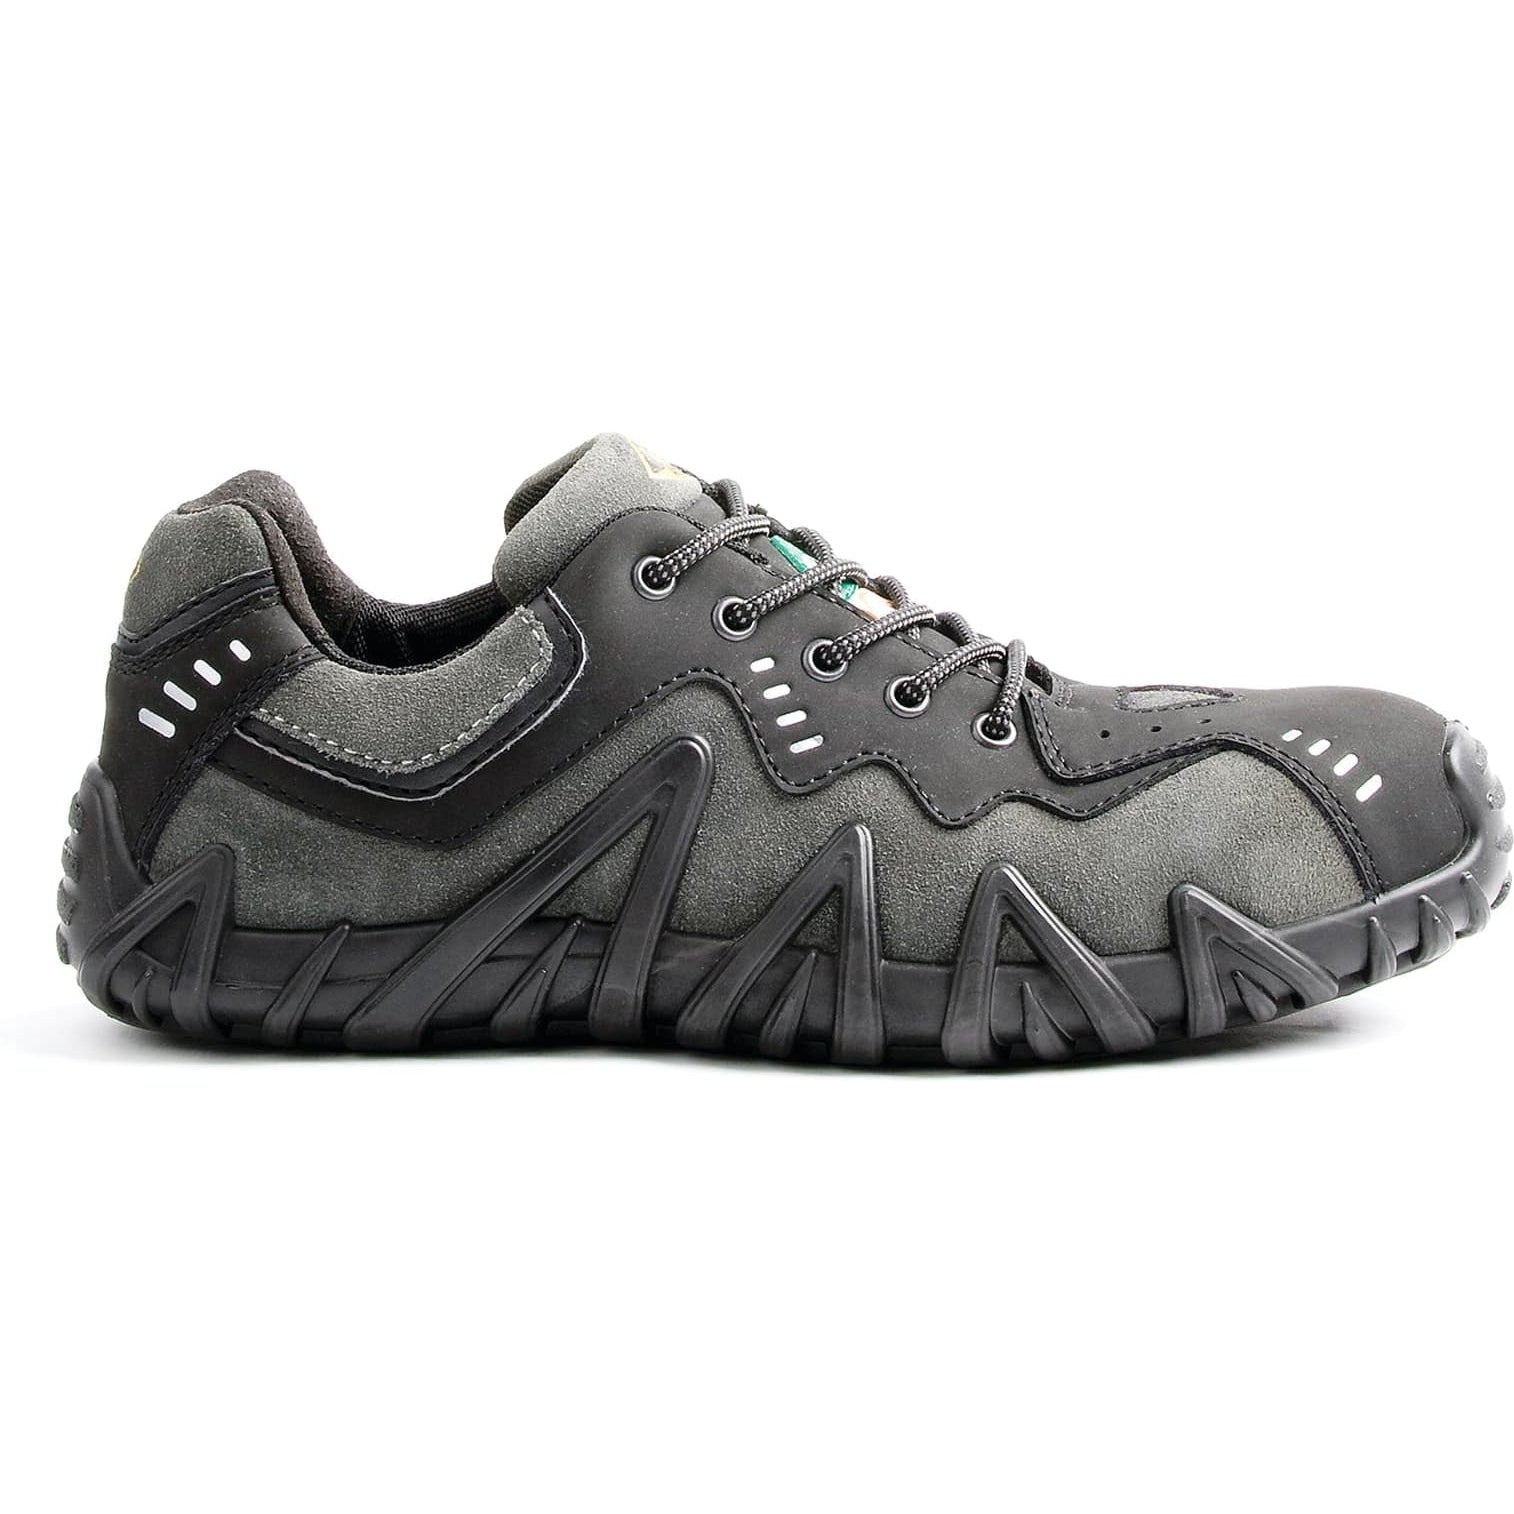 Terra Men's Spider Low CT Athletic Safety Work Shoe -Black- R8115B  - Overlook Boots